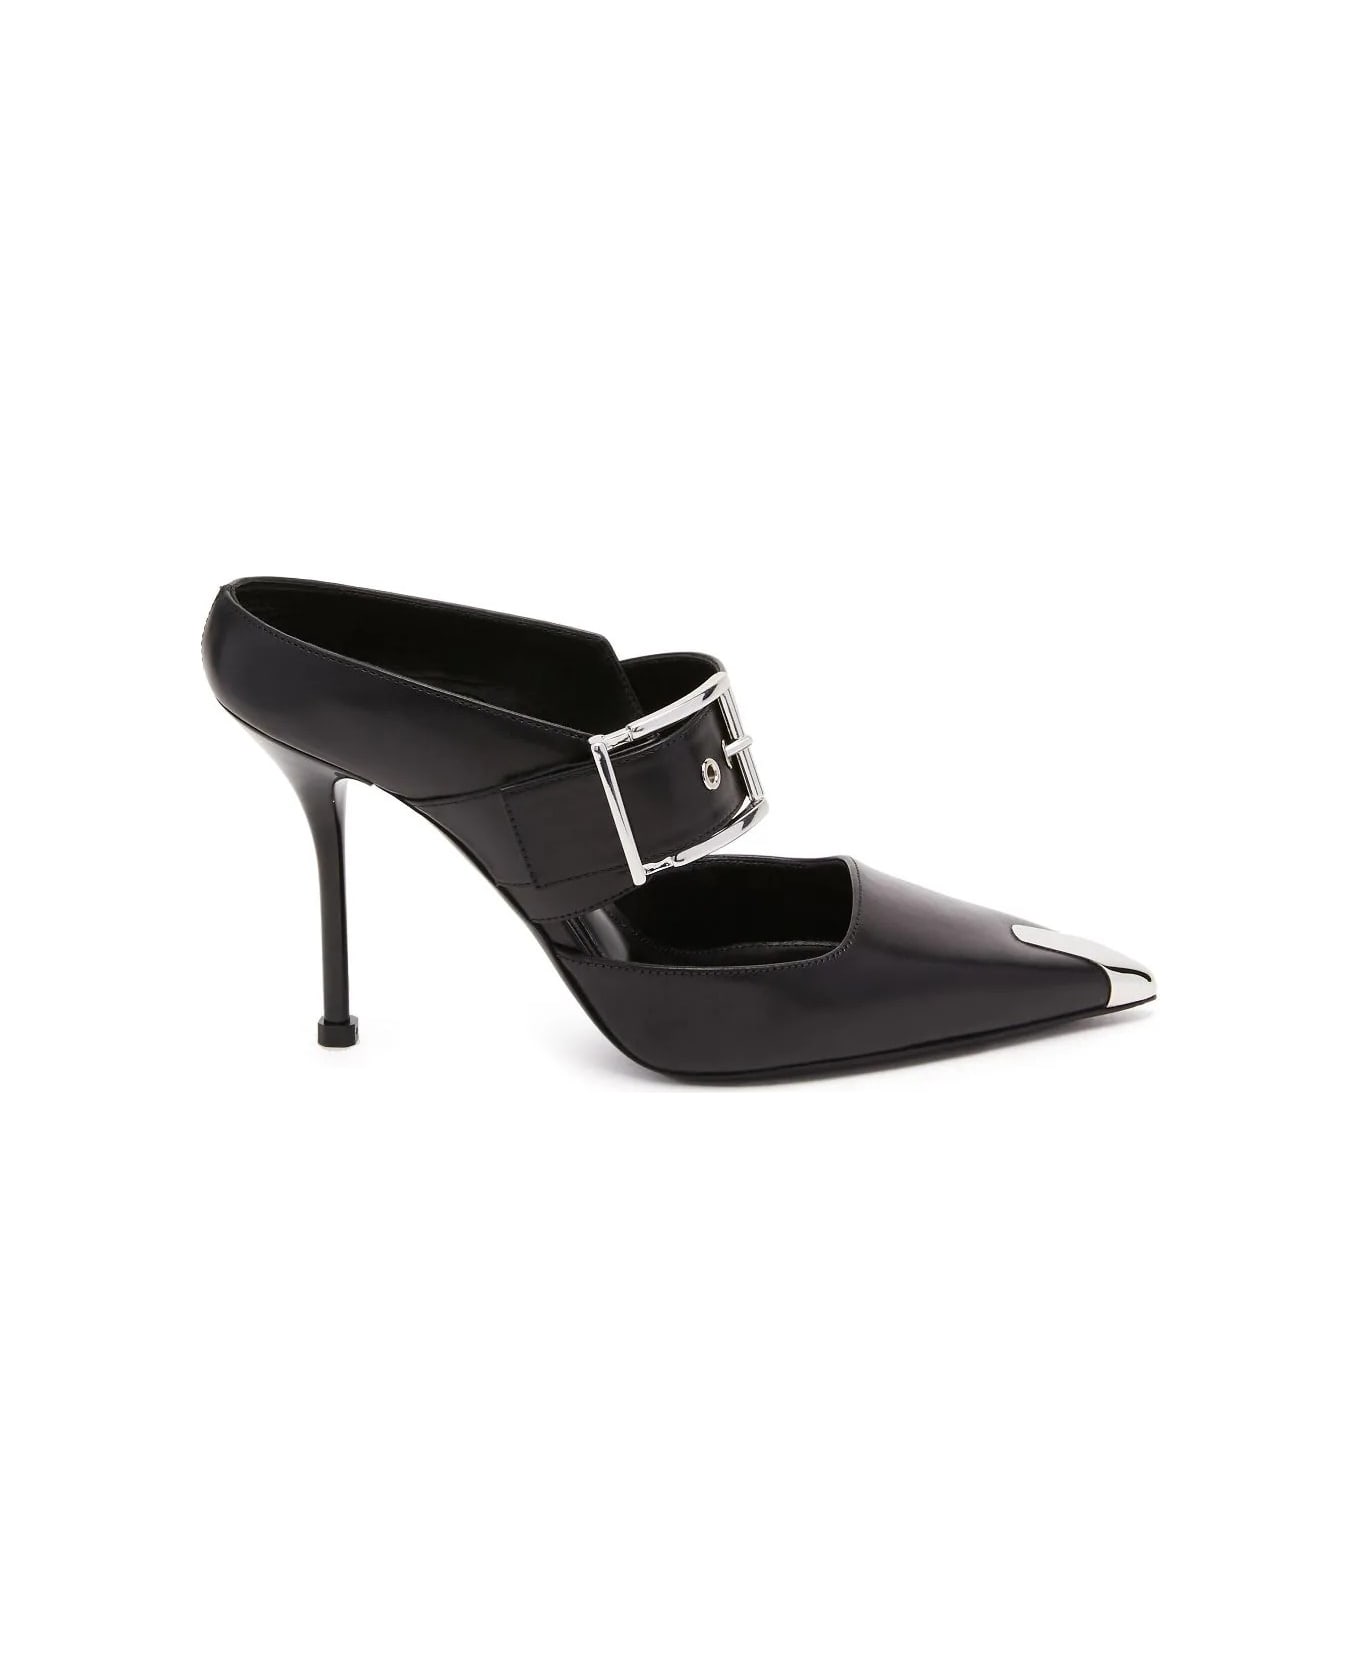 Alexander McQueen Punk Sandals With Buckle In Black And Silver - Black